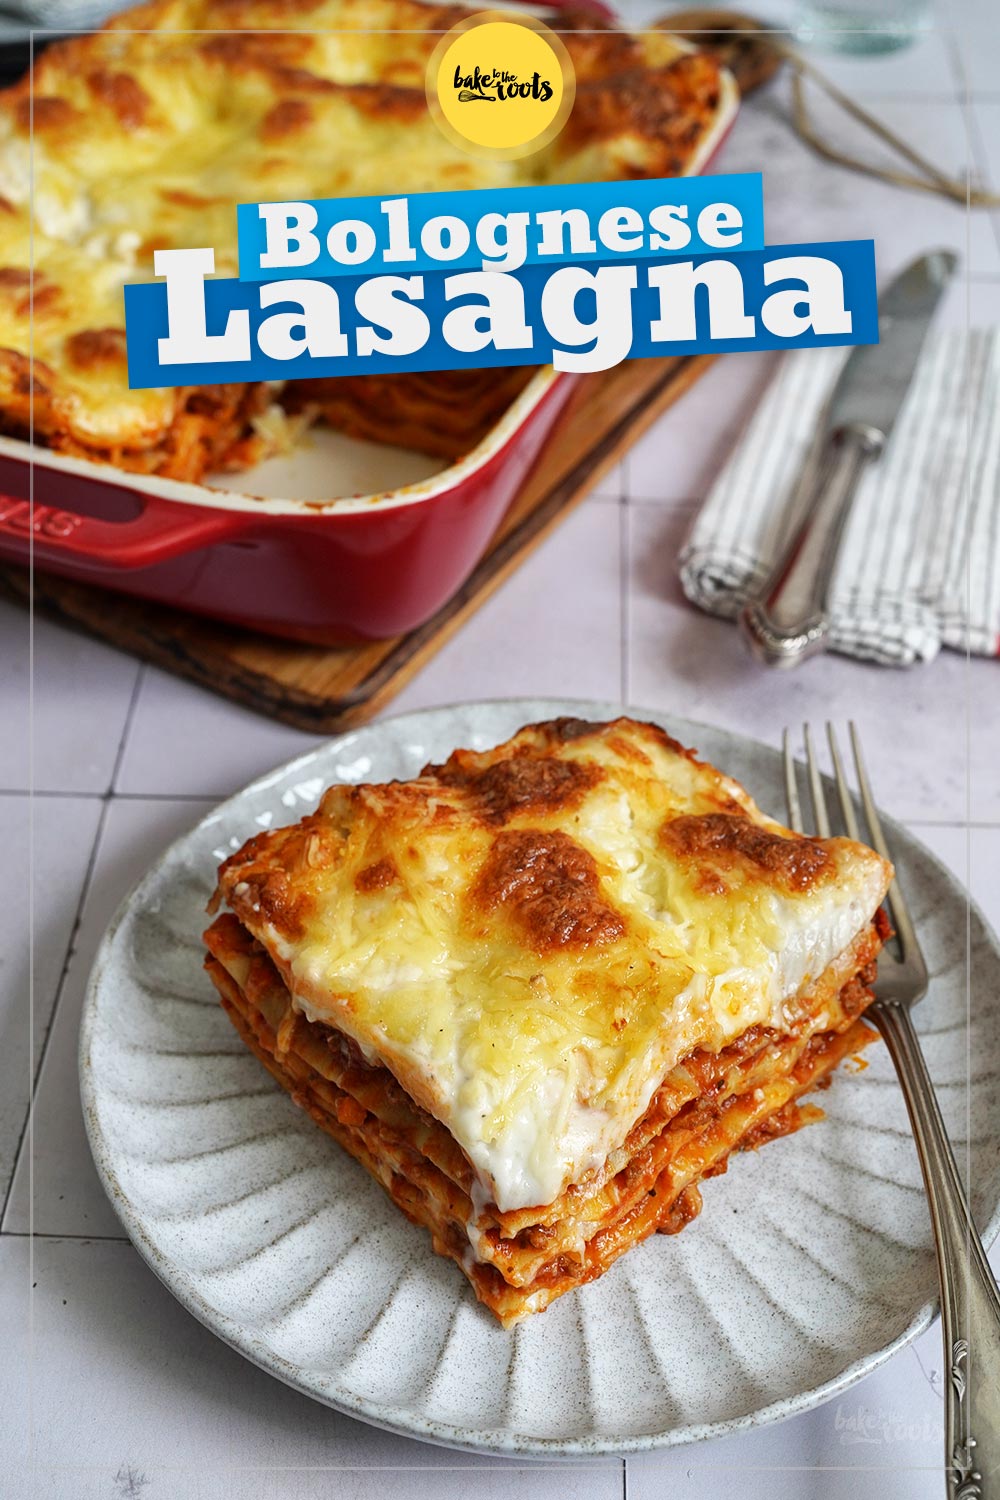 Classic Lasagna Bolognese | Bake to the roots